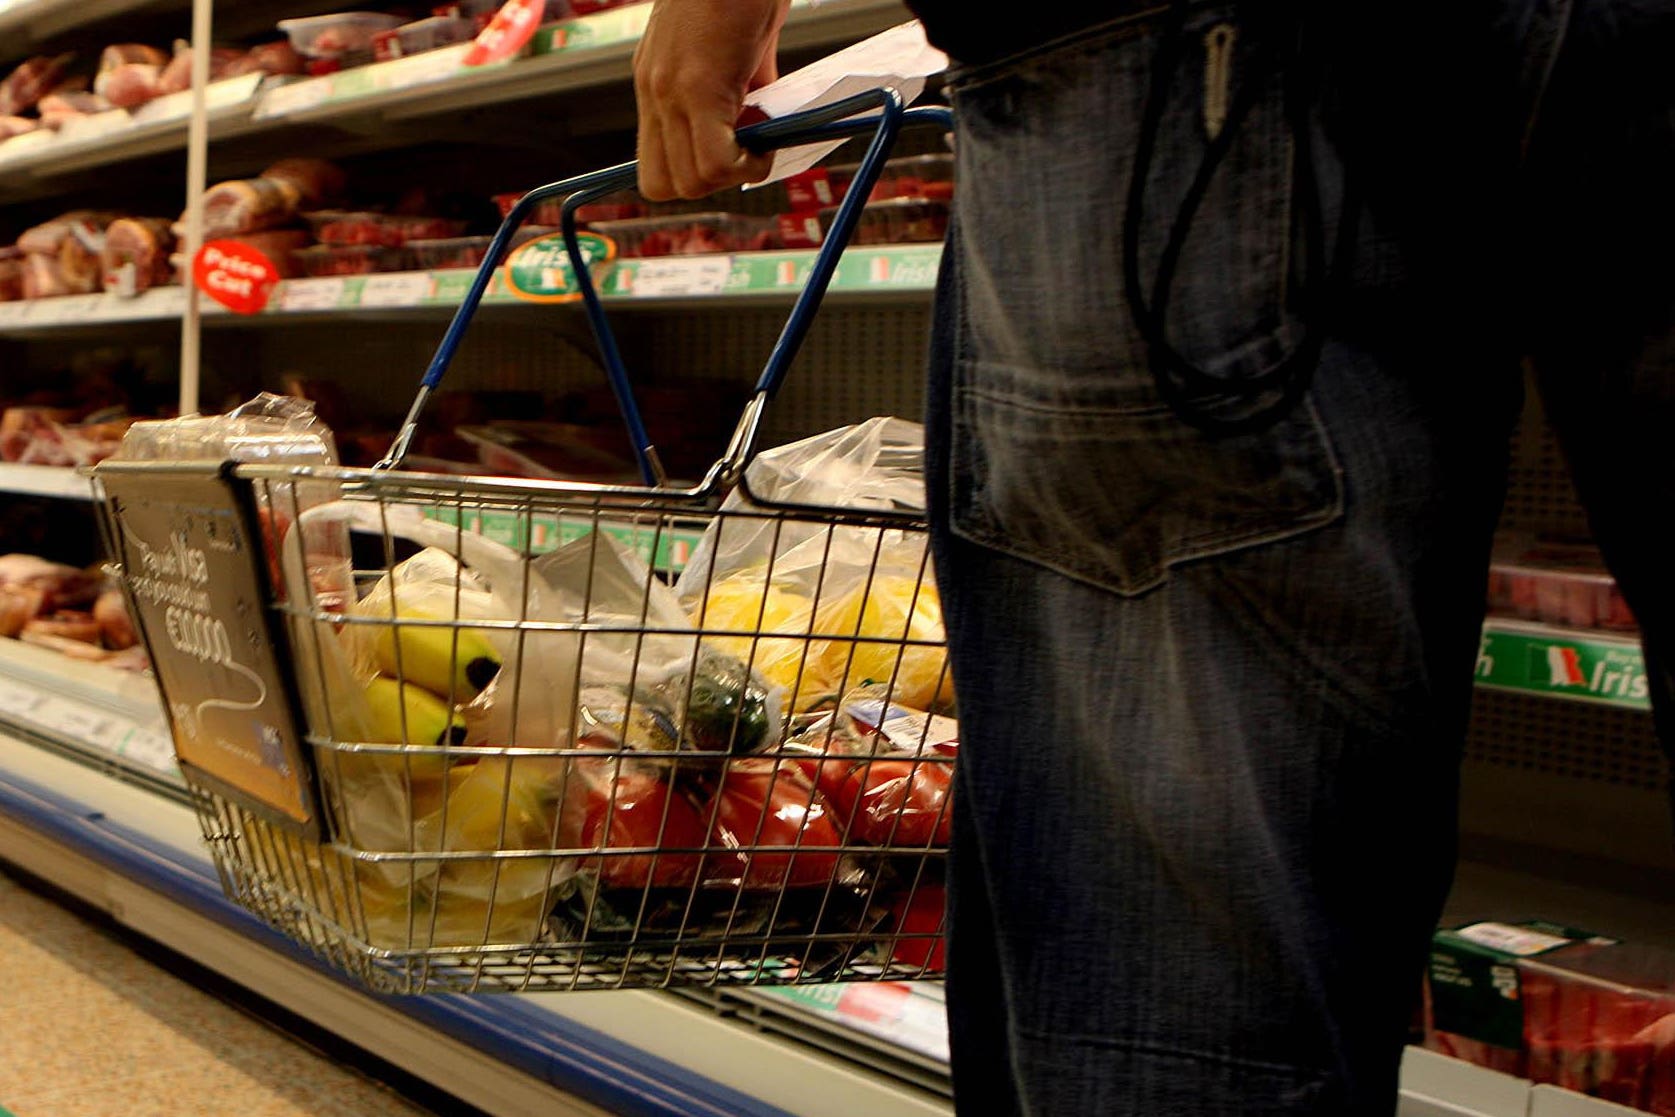 Annual food inflation had risen to almost 15%, which campaigners said put millions of British families and children in food insecurity (Julien Behal/PA)